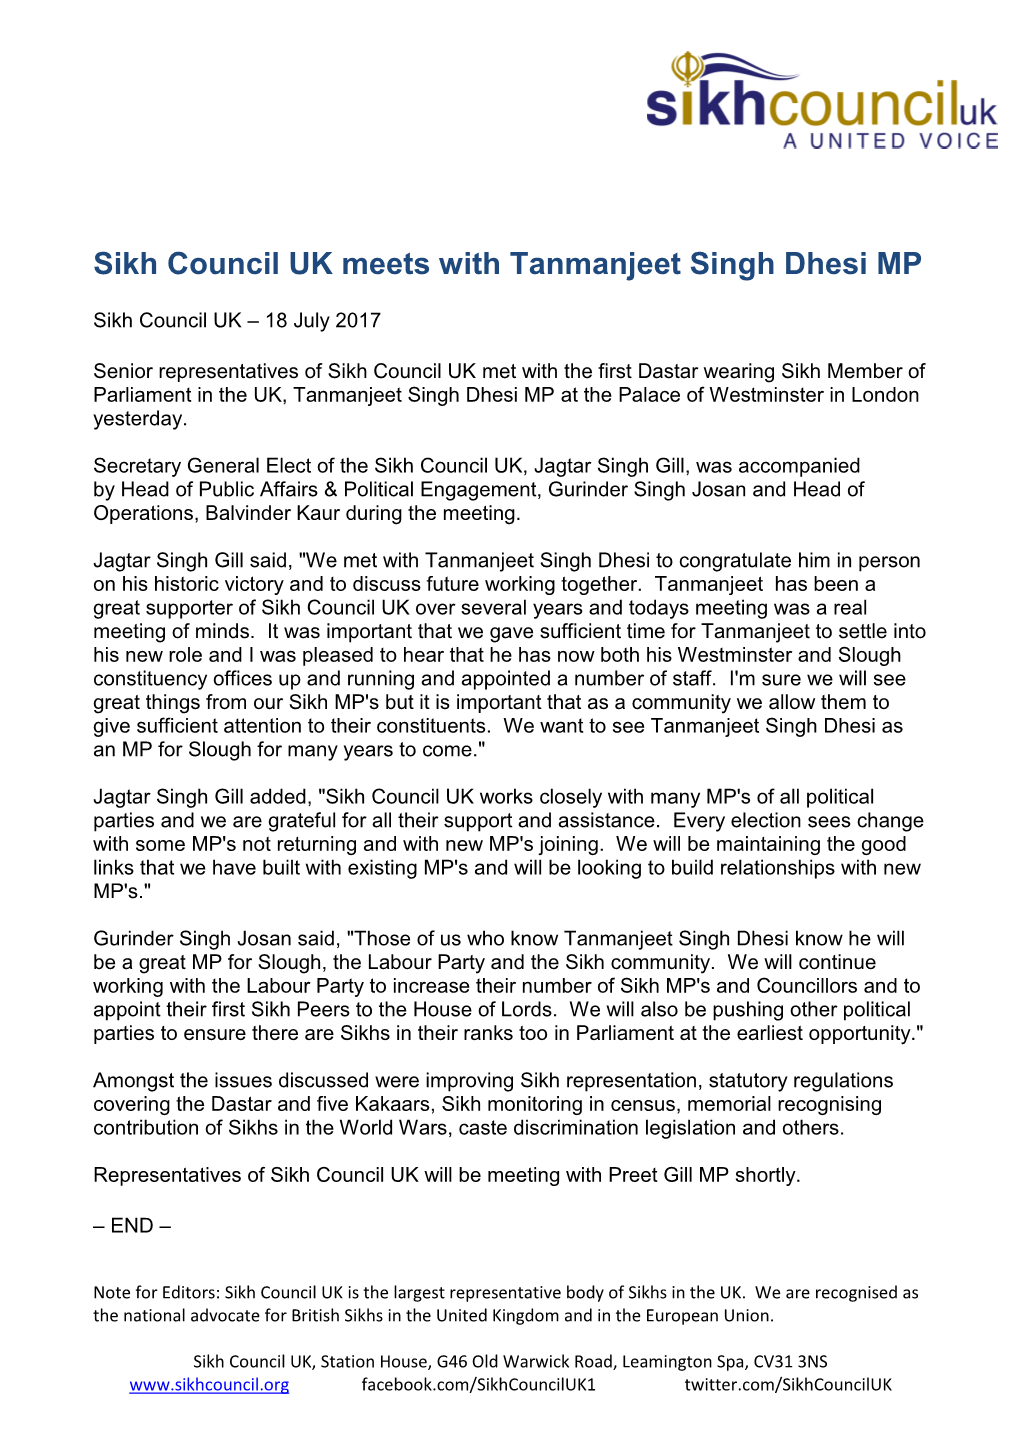 Sikh Council UK Meets with Tanmanjeet Singh Dhesi MP